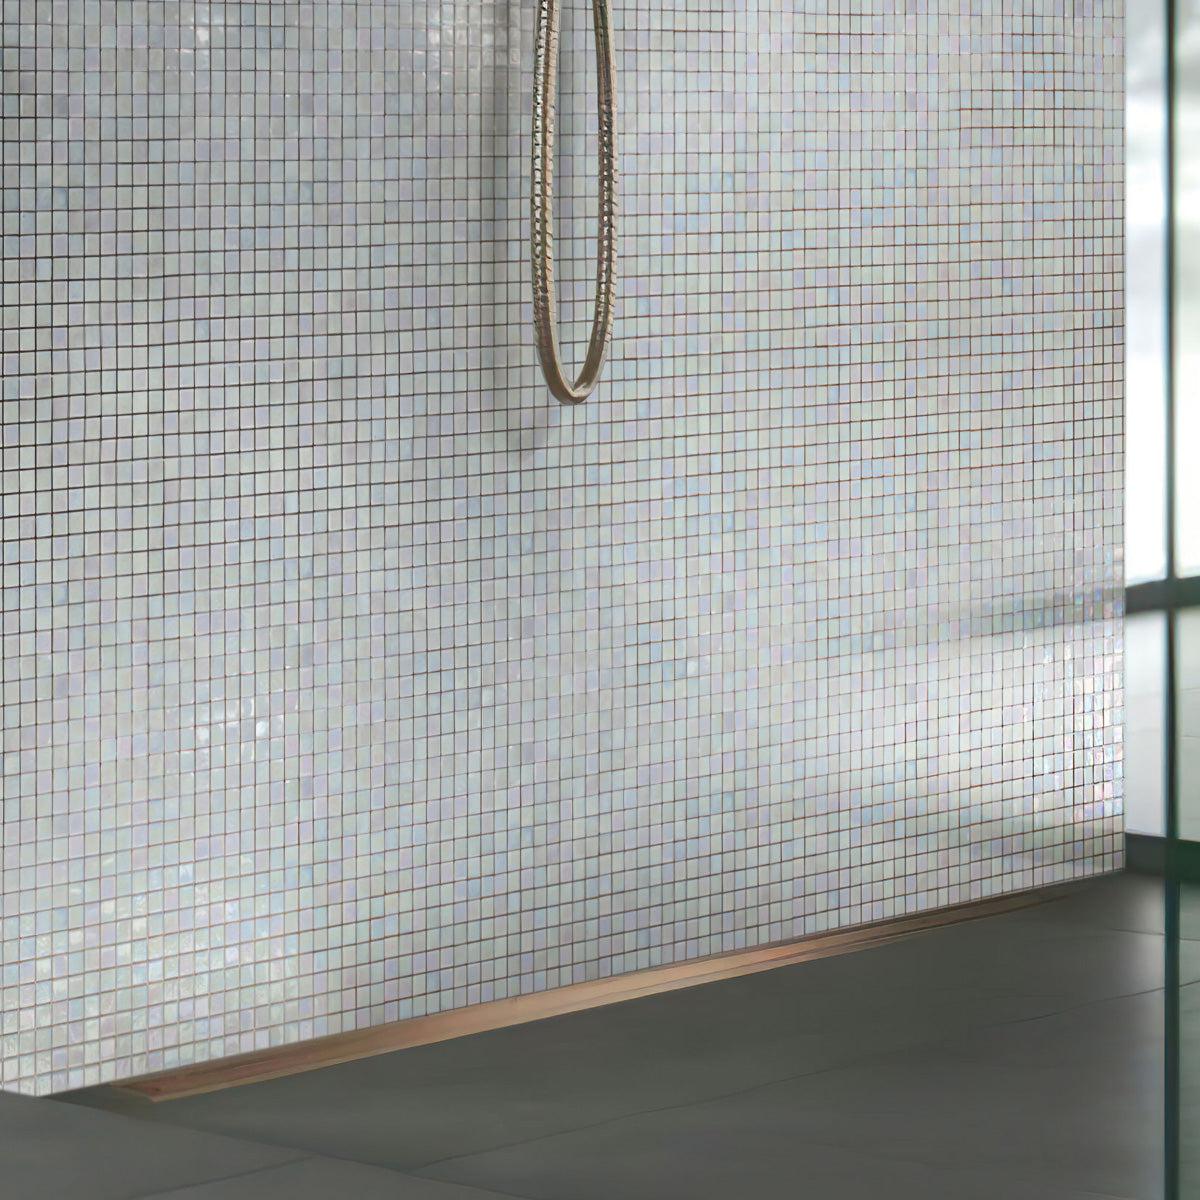 Pearlescent Ashy White Square Glass Pool Tile